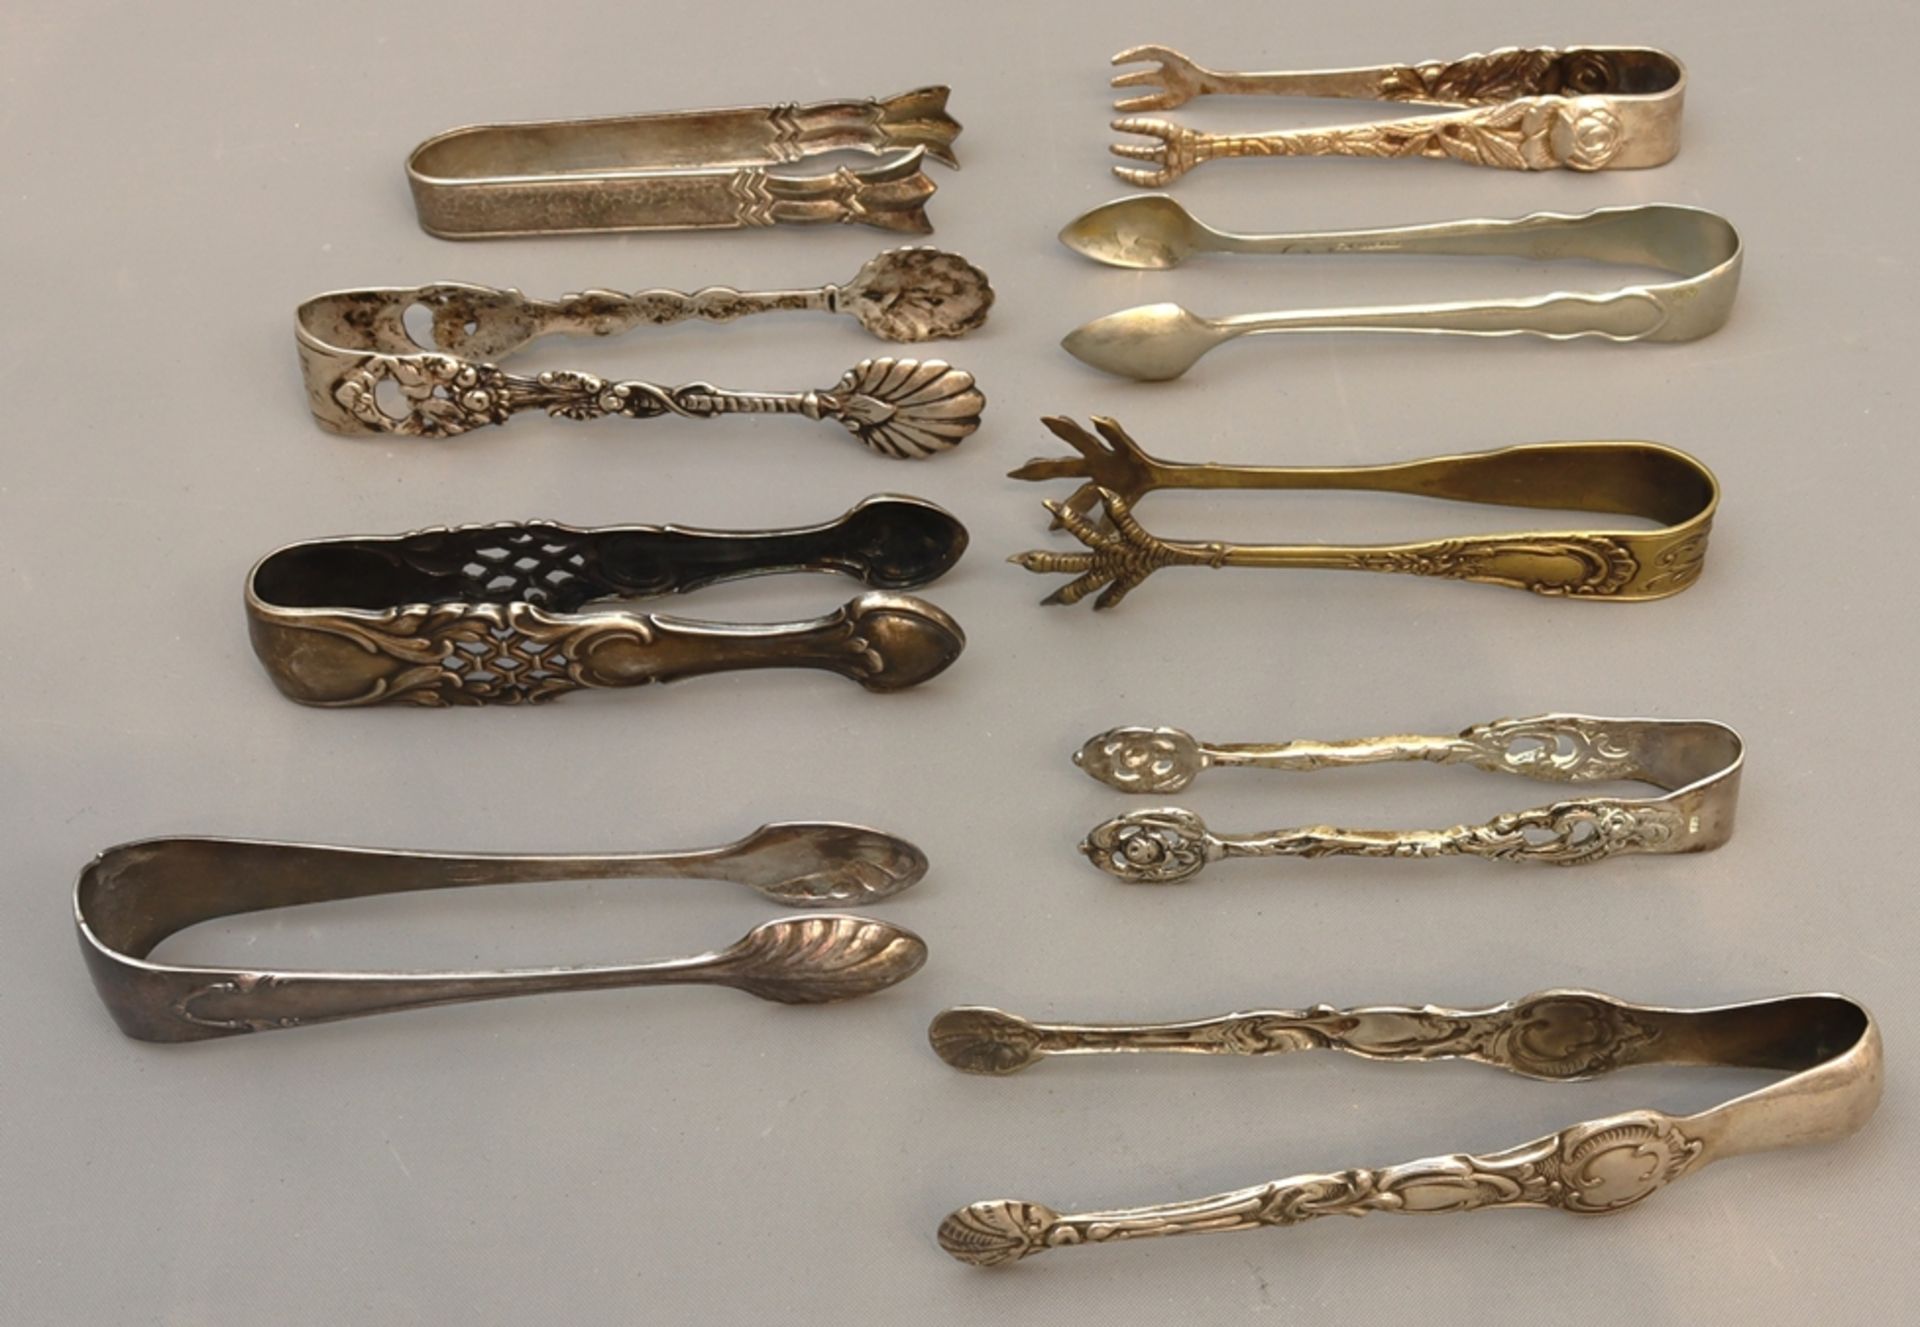 Silver sugar tongs of various types, early to mid 20th c., German